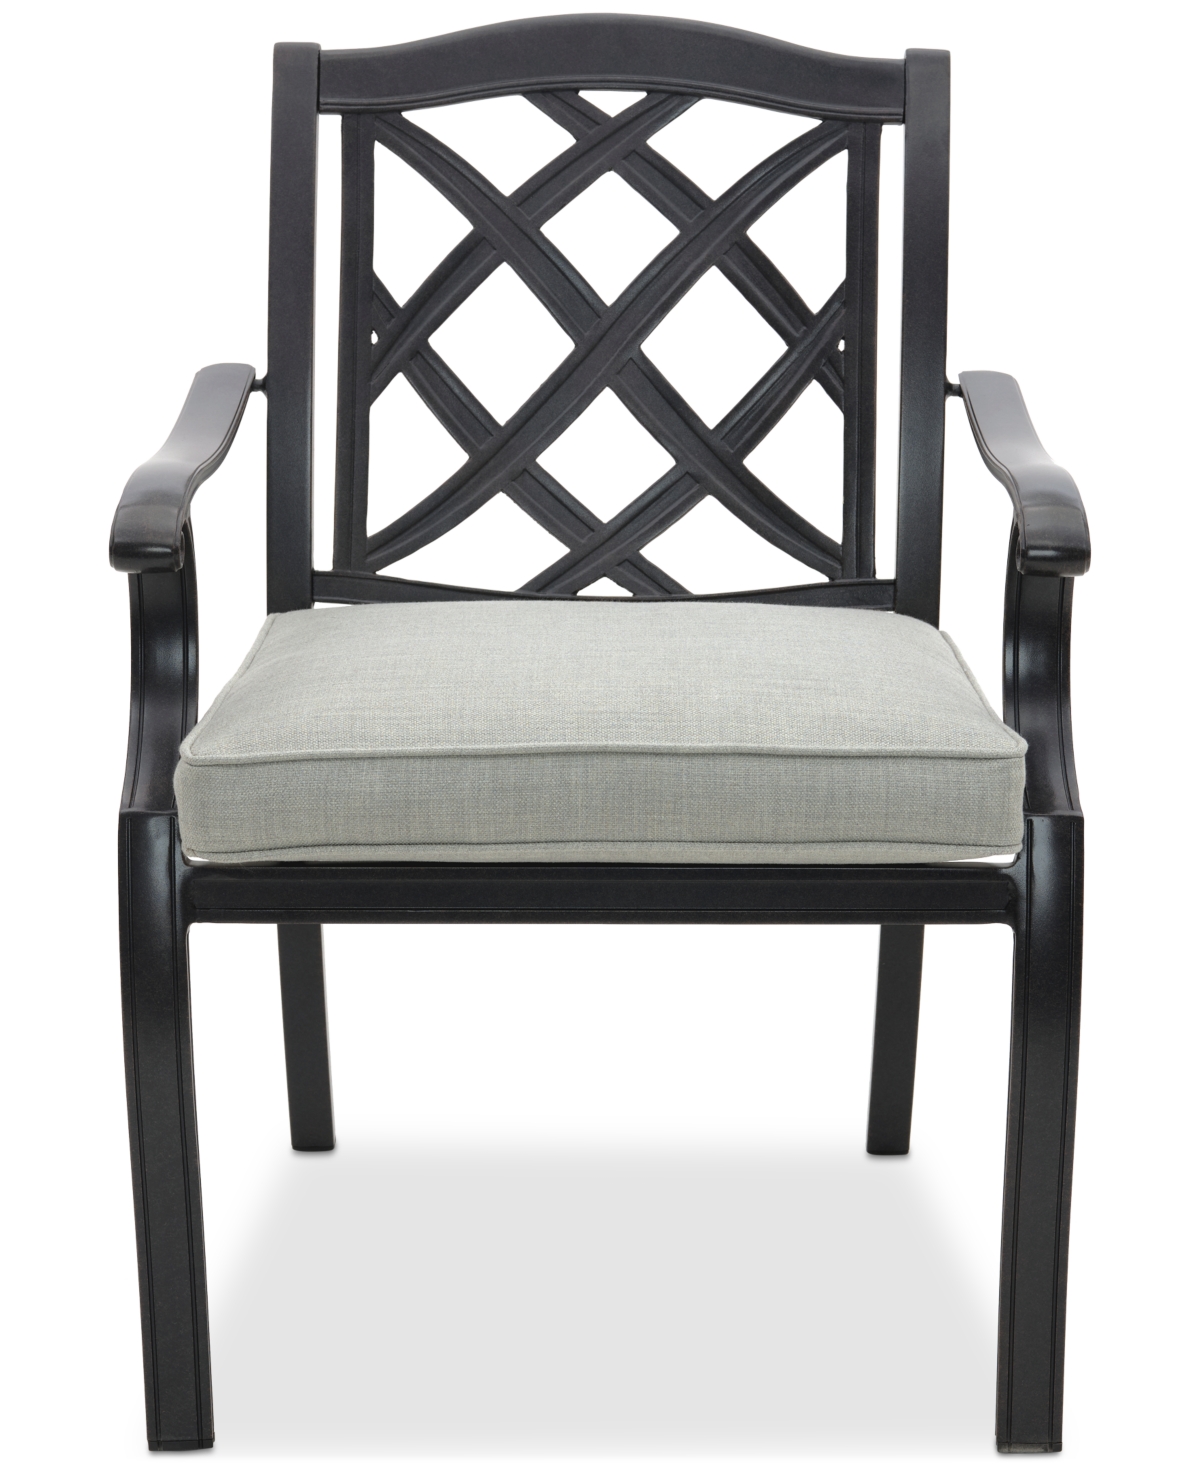 Agio Wythburn Mix And Match Lattice Outdoor Dining Chair In Oyster Light Grey,pewter Finish